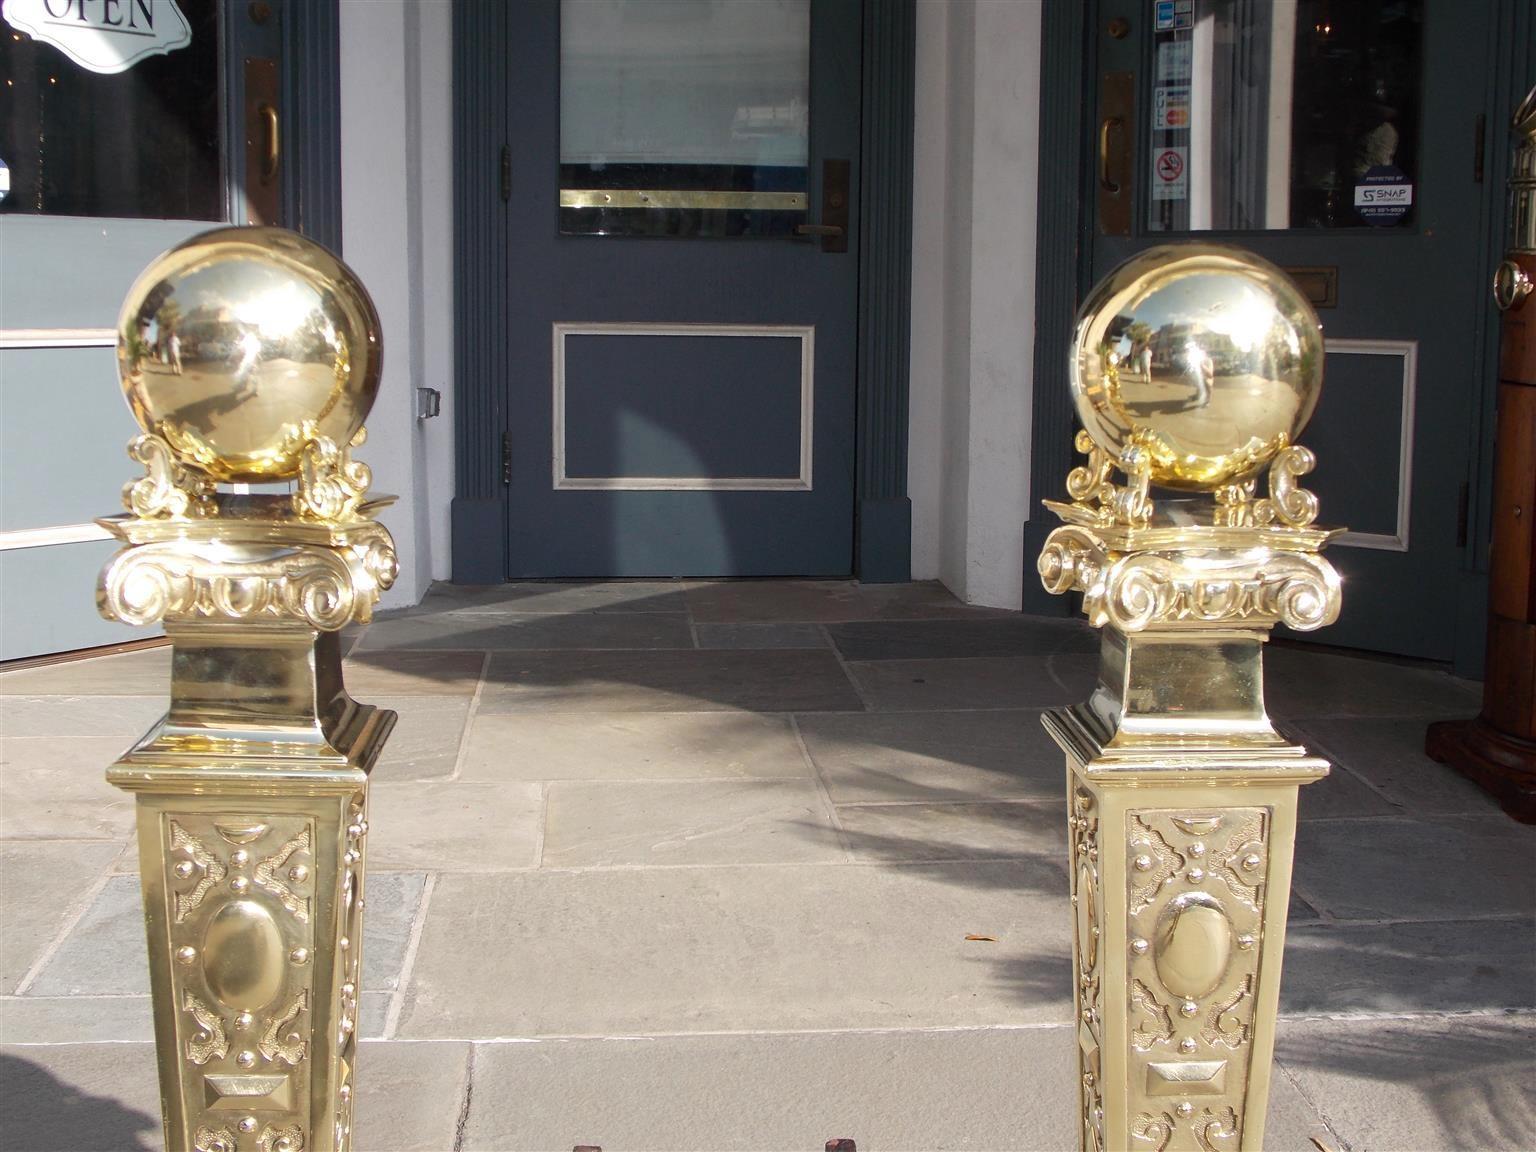 Pair of American Monumental brass andirons with flanking ball finials, Ionic capitals, tapered decorative medallion plinths, spit hooks, matching squared tapered log stops, original wrought iron dog legs, and resting on arched centered medallion